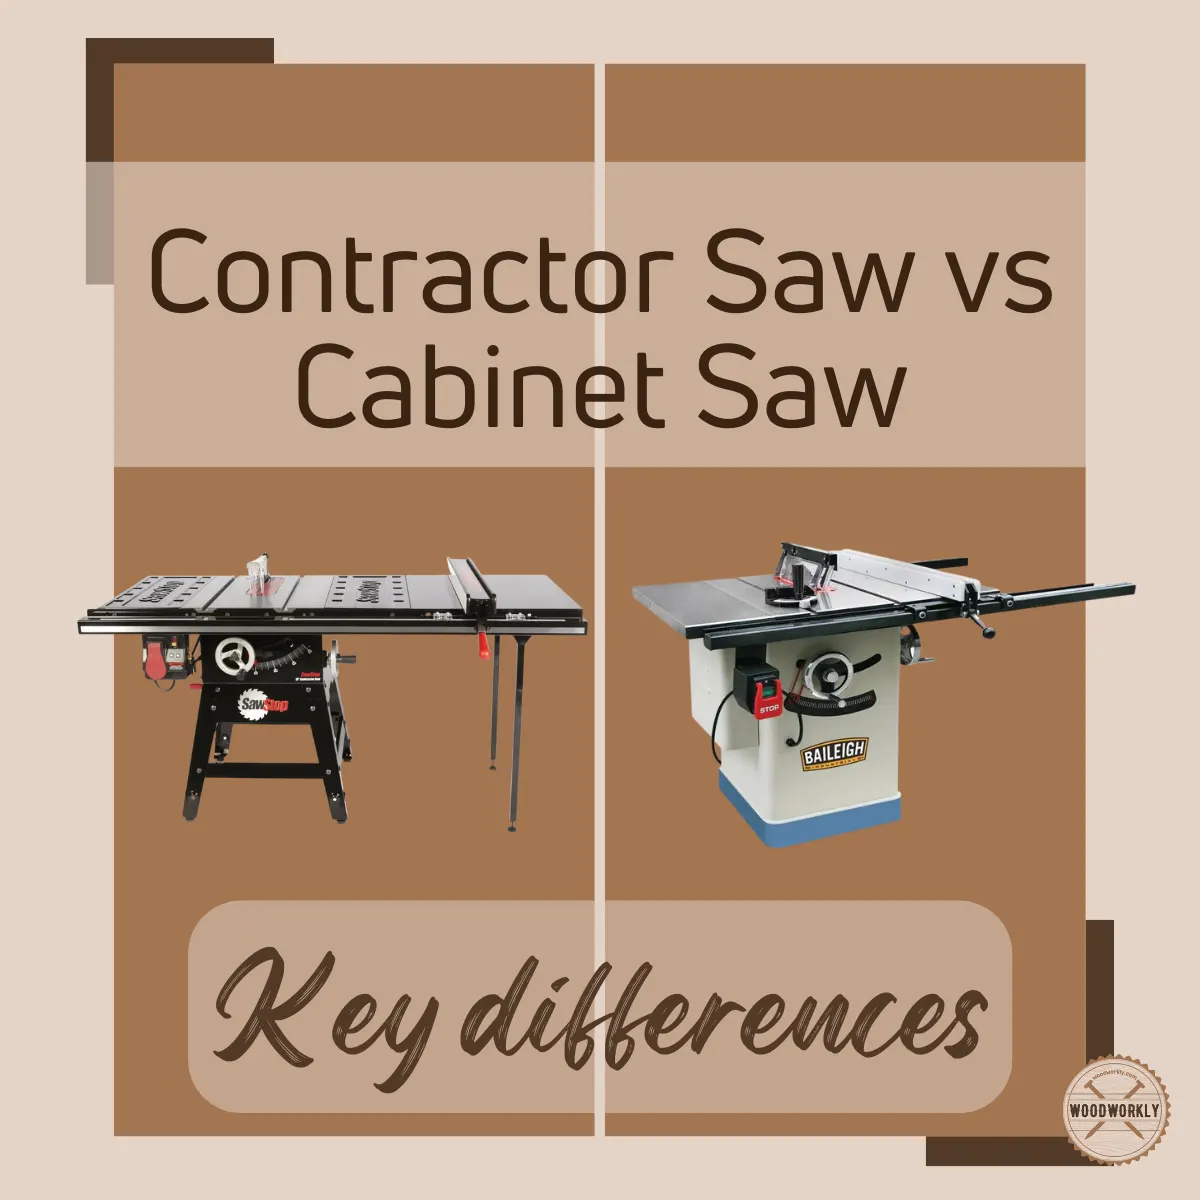 Contractor Saw vs Cabinet Saw